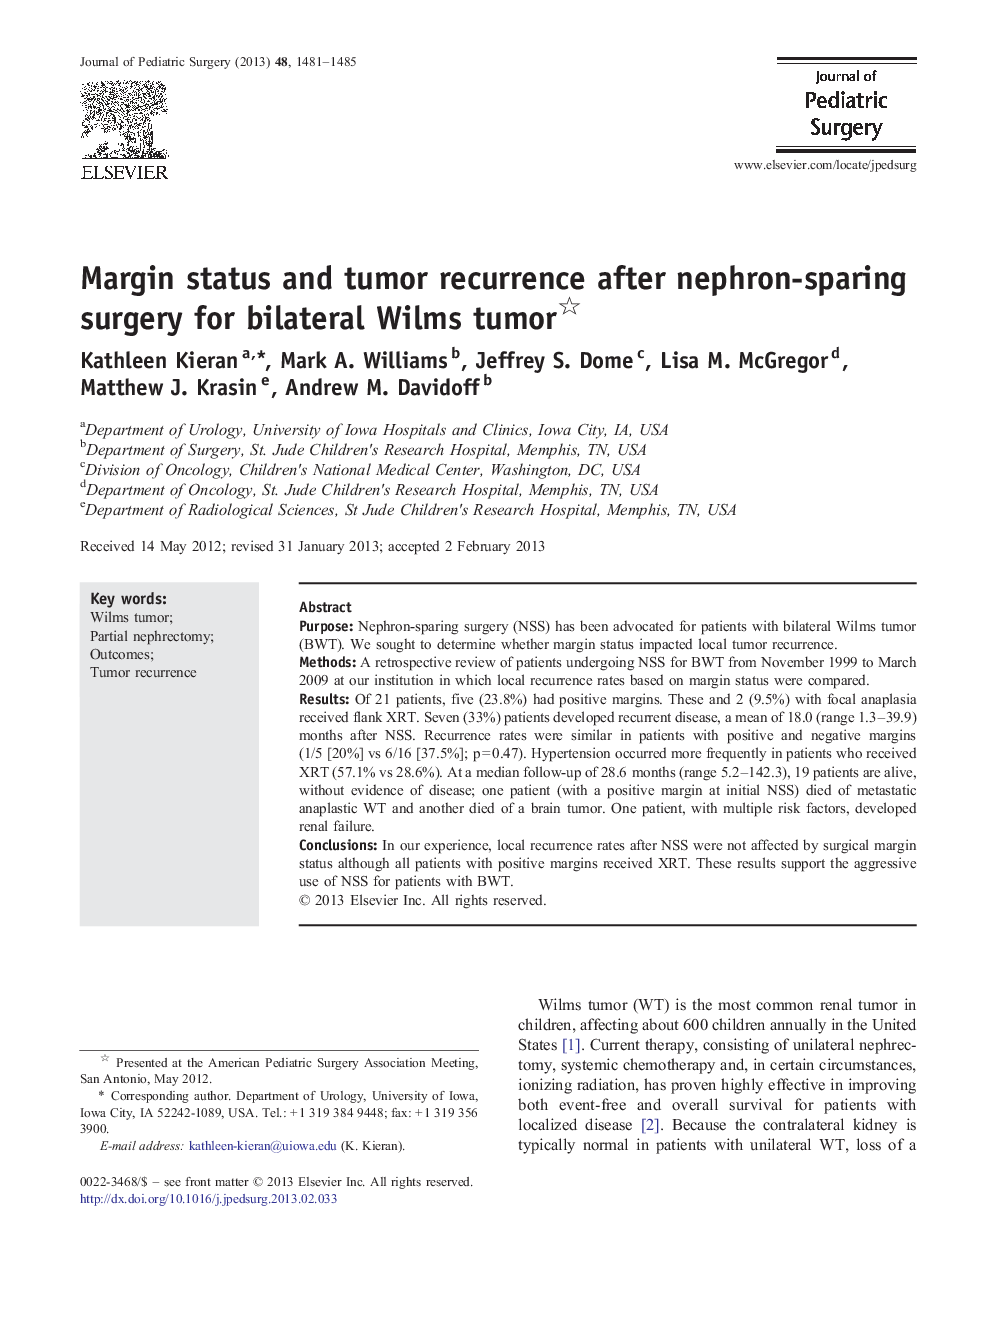 Margin status and tumor recurrence after nephron-sparing surgery for bilateral Wilms tumor